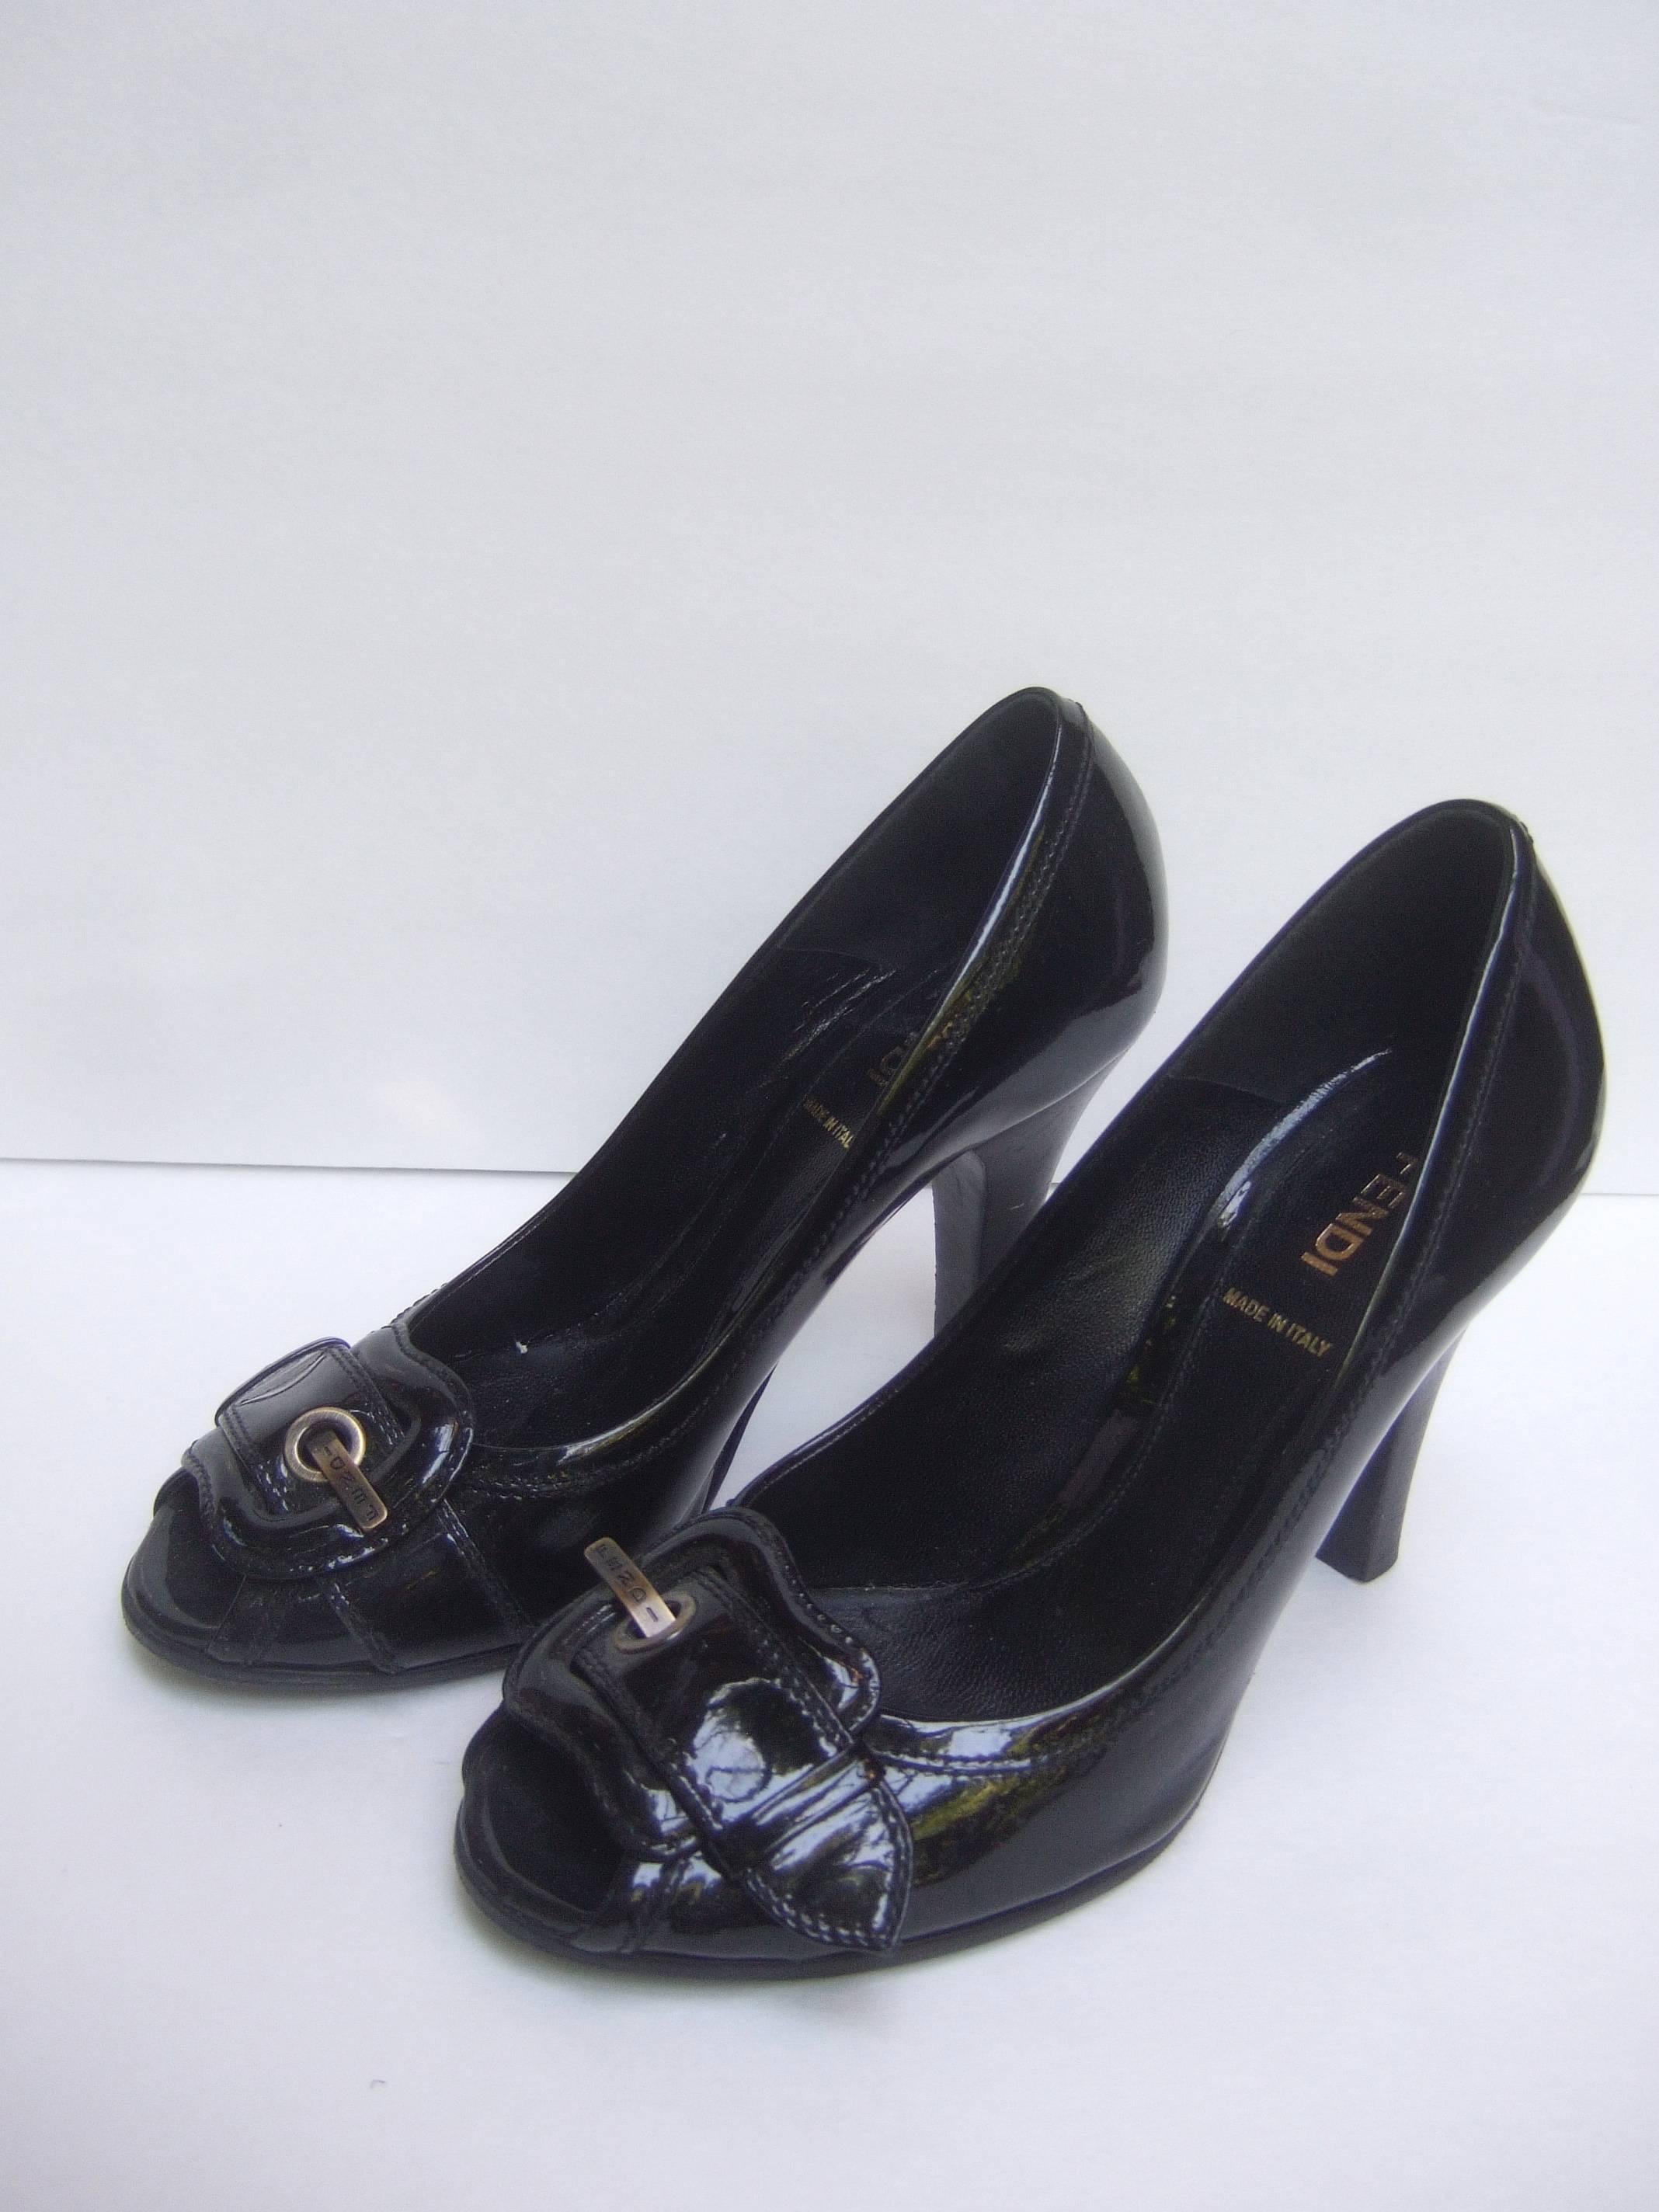 Fendi Italy Black Patent Leather Buckle Pumps 37.5 In Good Condition For Sale In University City, MO